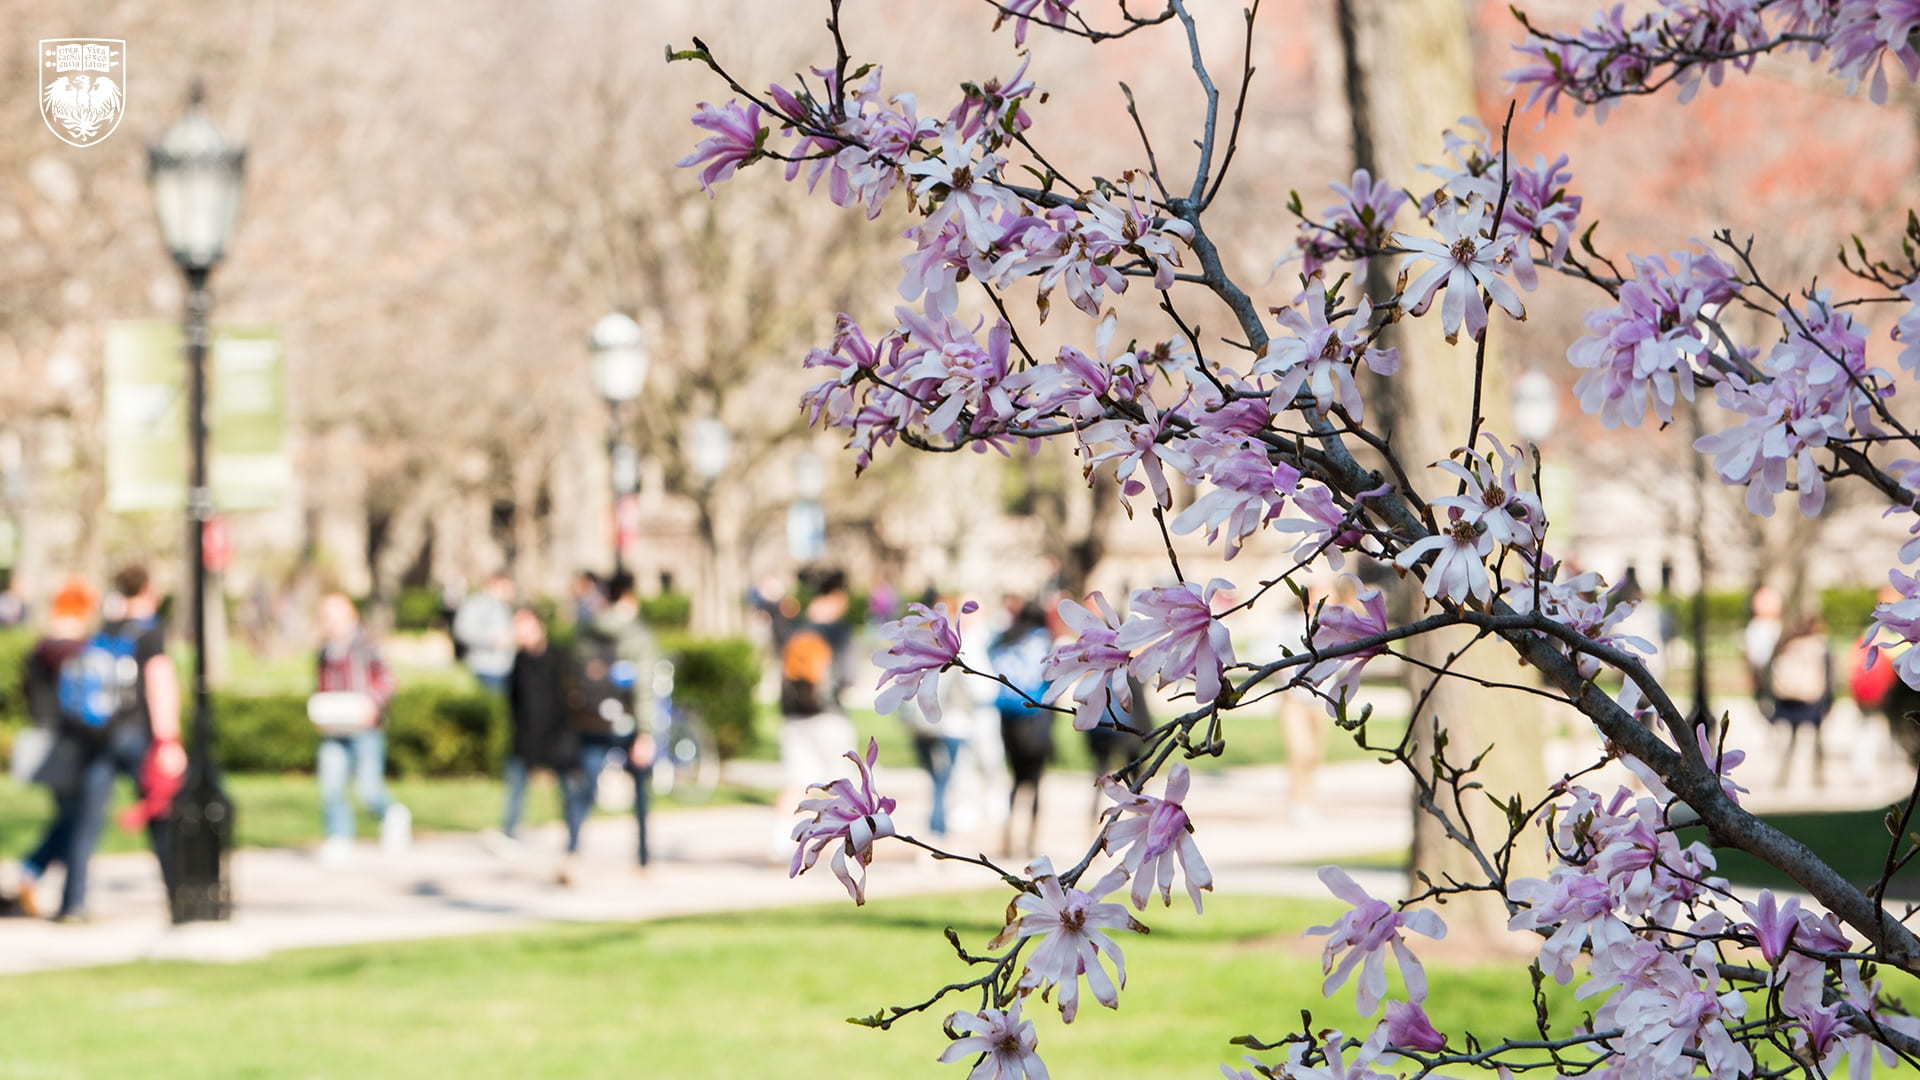 People walking across the quad on a sunny day with pink blooms in the foreground